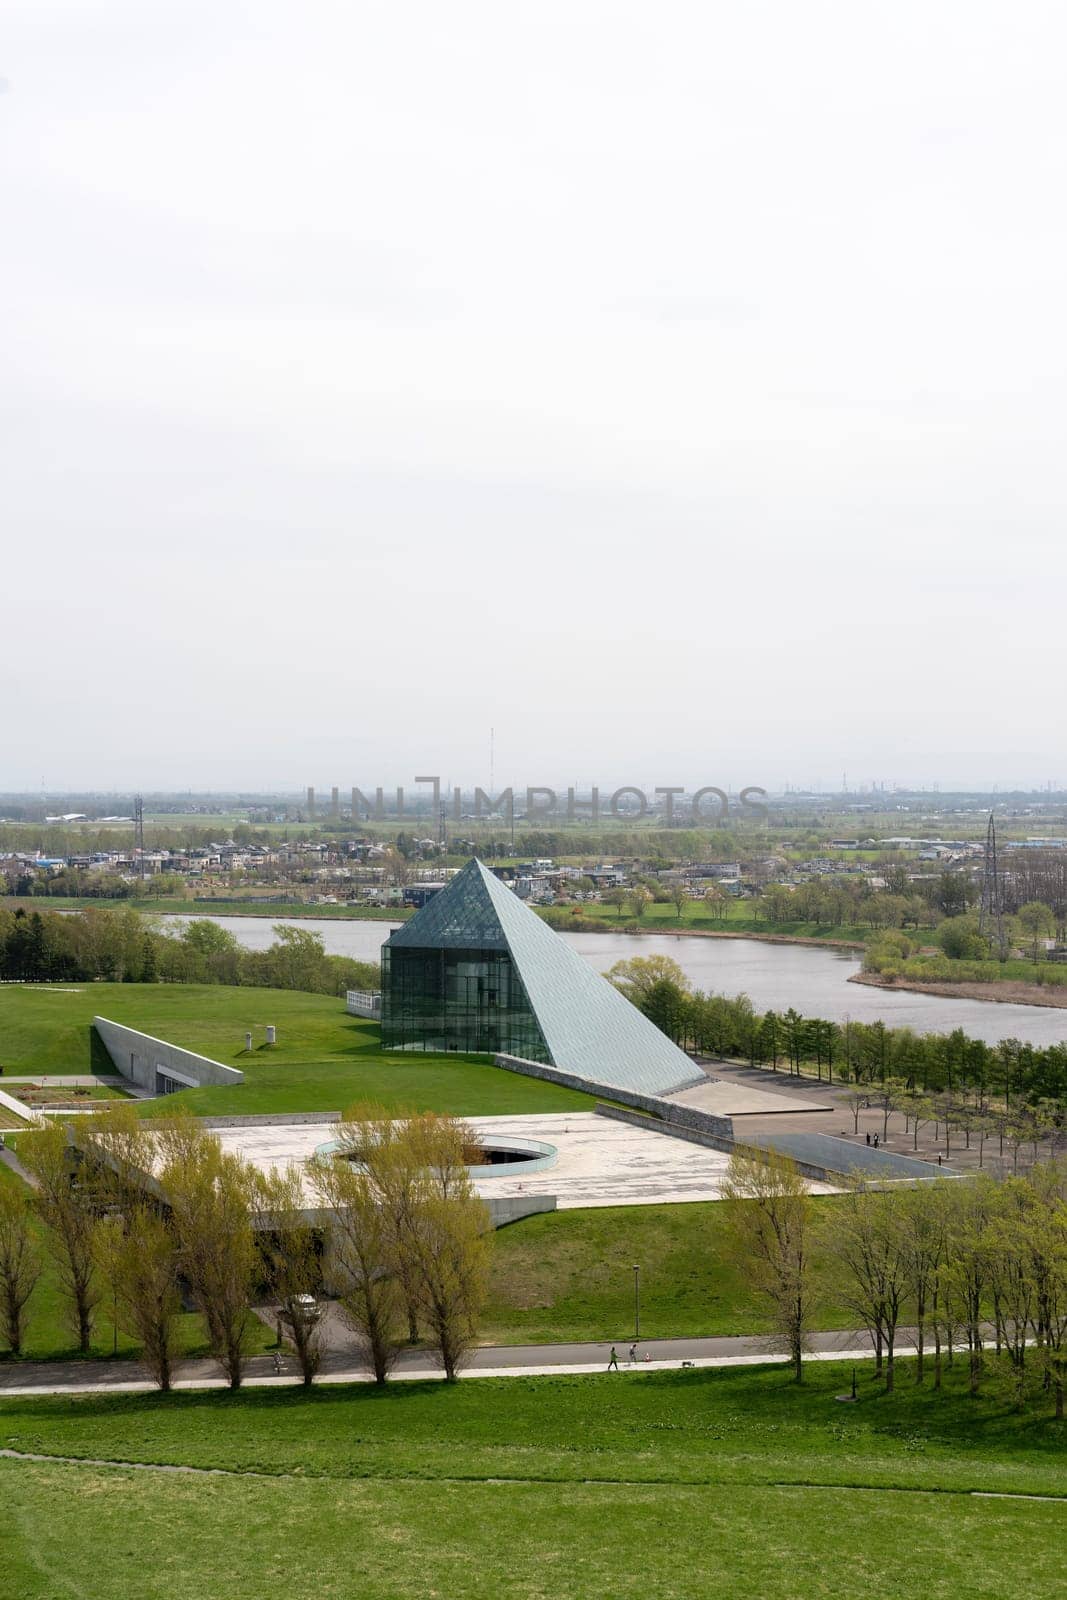 SAPPORO, JAPAN - 05 MAY 2024 : The symbol of Moerenuma park, the glass pyramid Hidamari, on February 5 in Sapporo. The glass pyramid is multi-purpose space, such as cultural activities and museum.